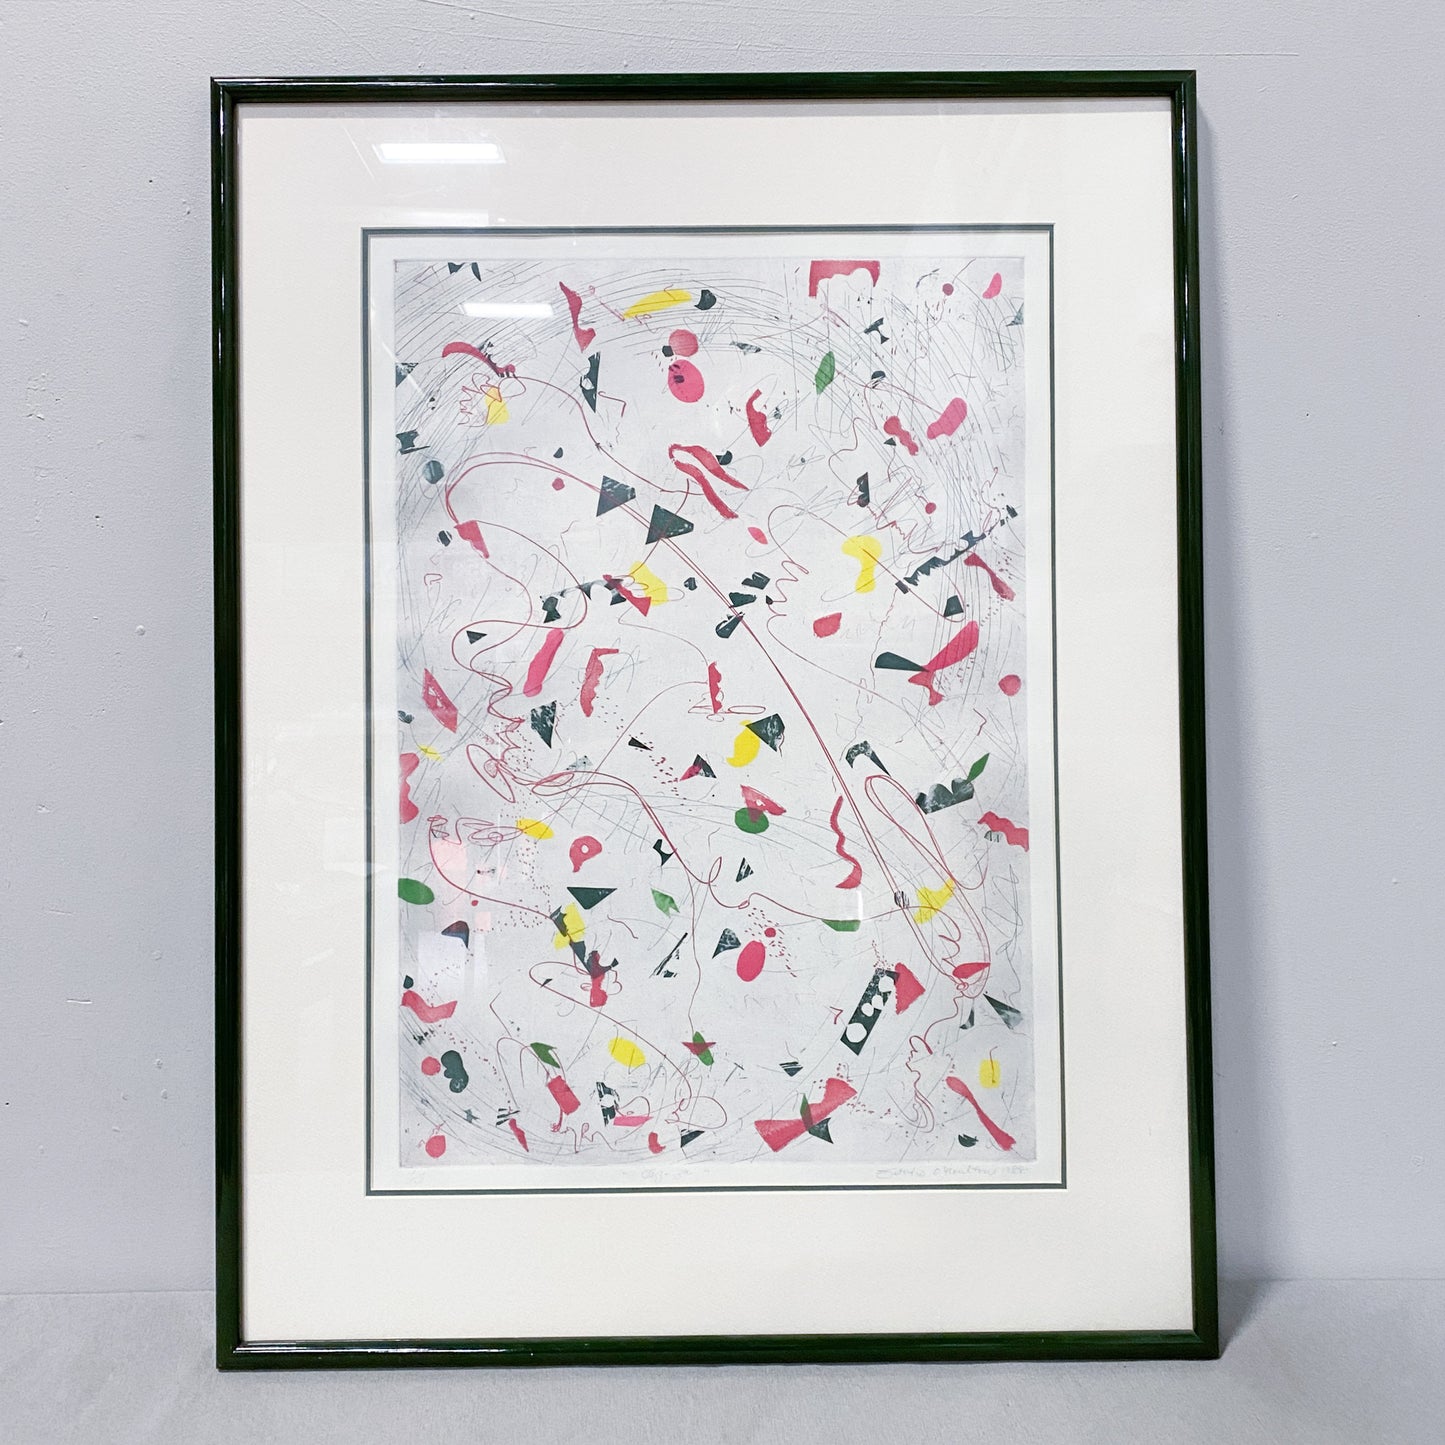 33" x 25" Framed Abstract Print